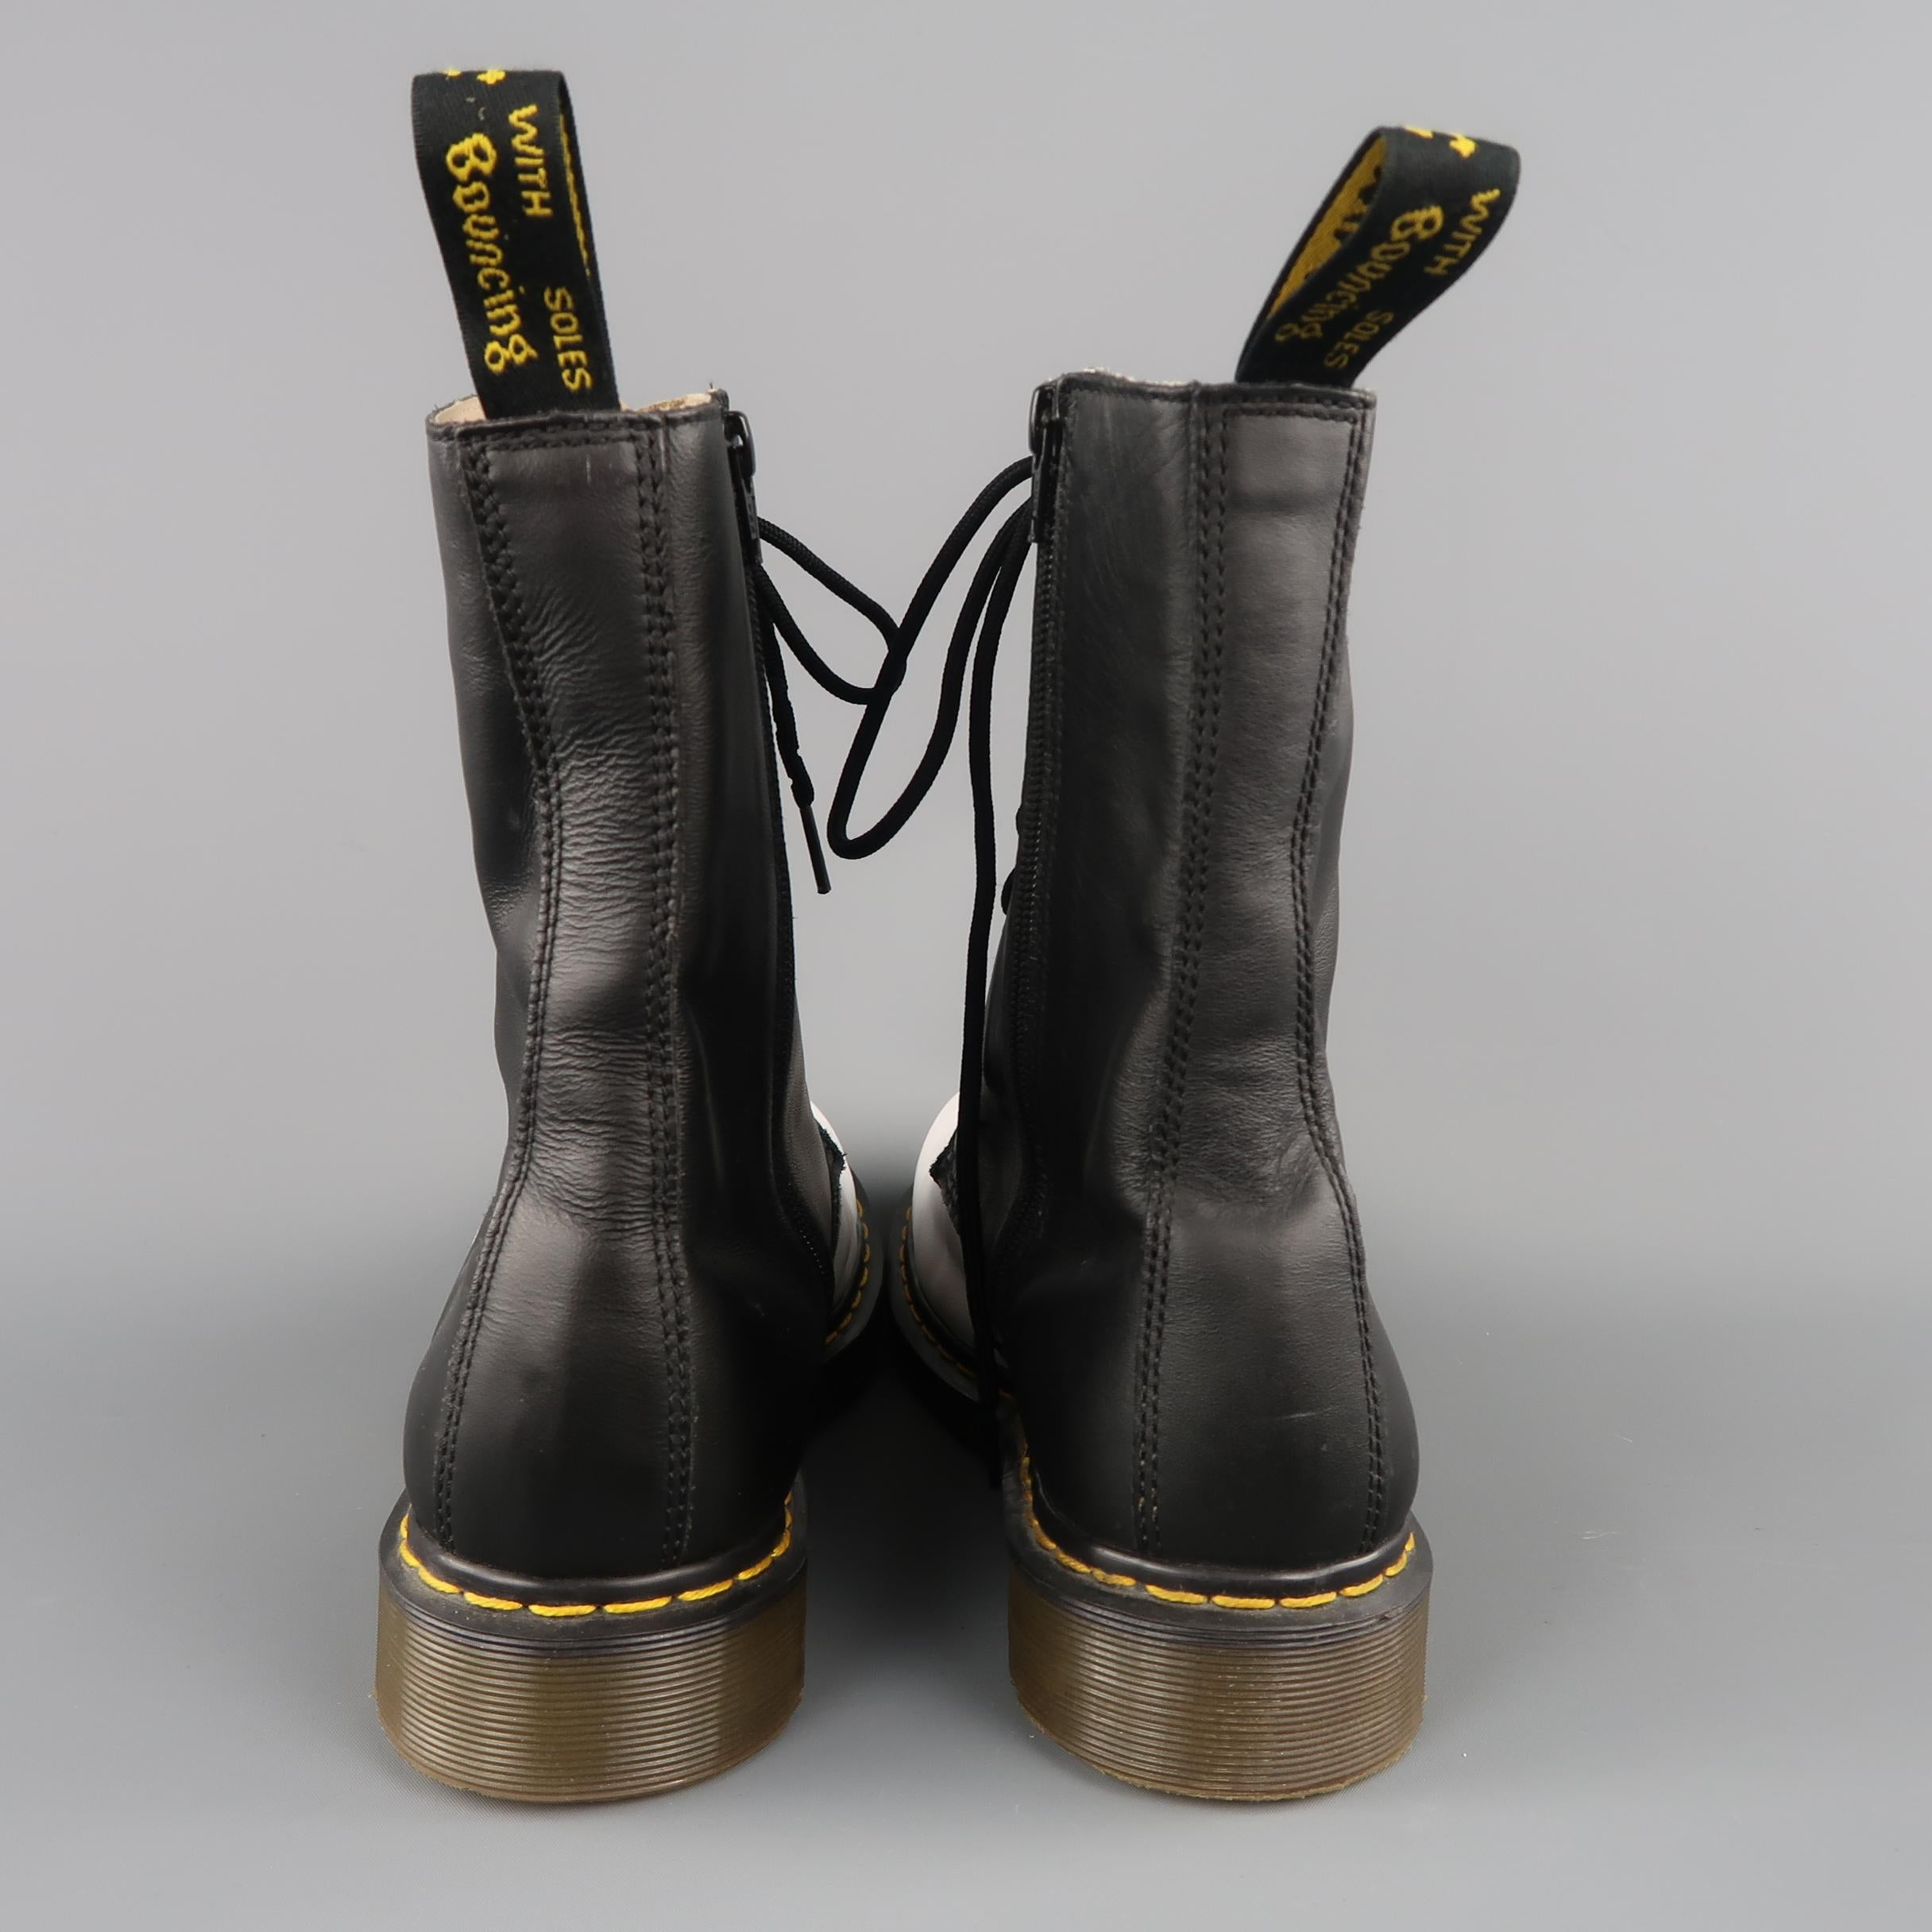 Yohji Yamamoto For Dr. Martens Black and White Two Toned Leather Boots 3